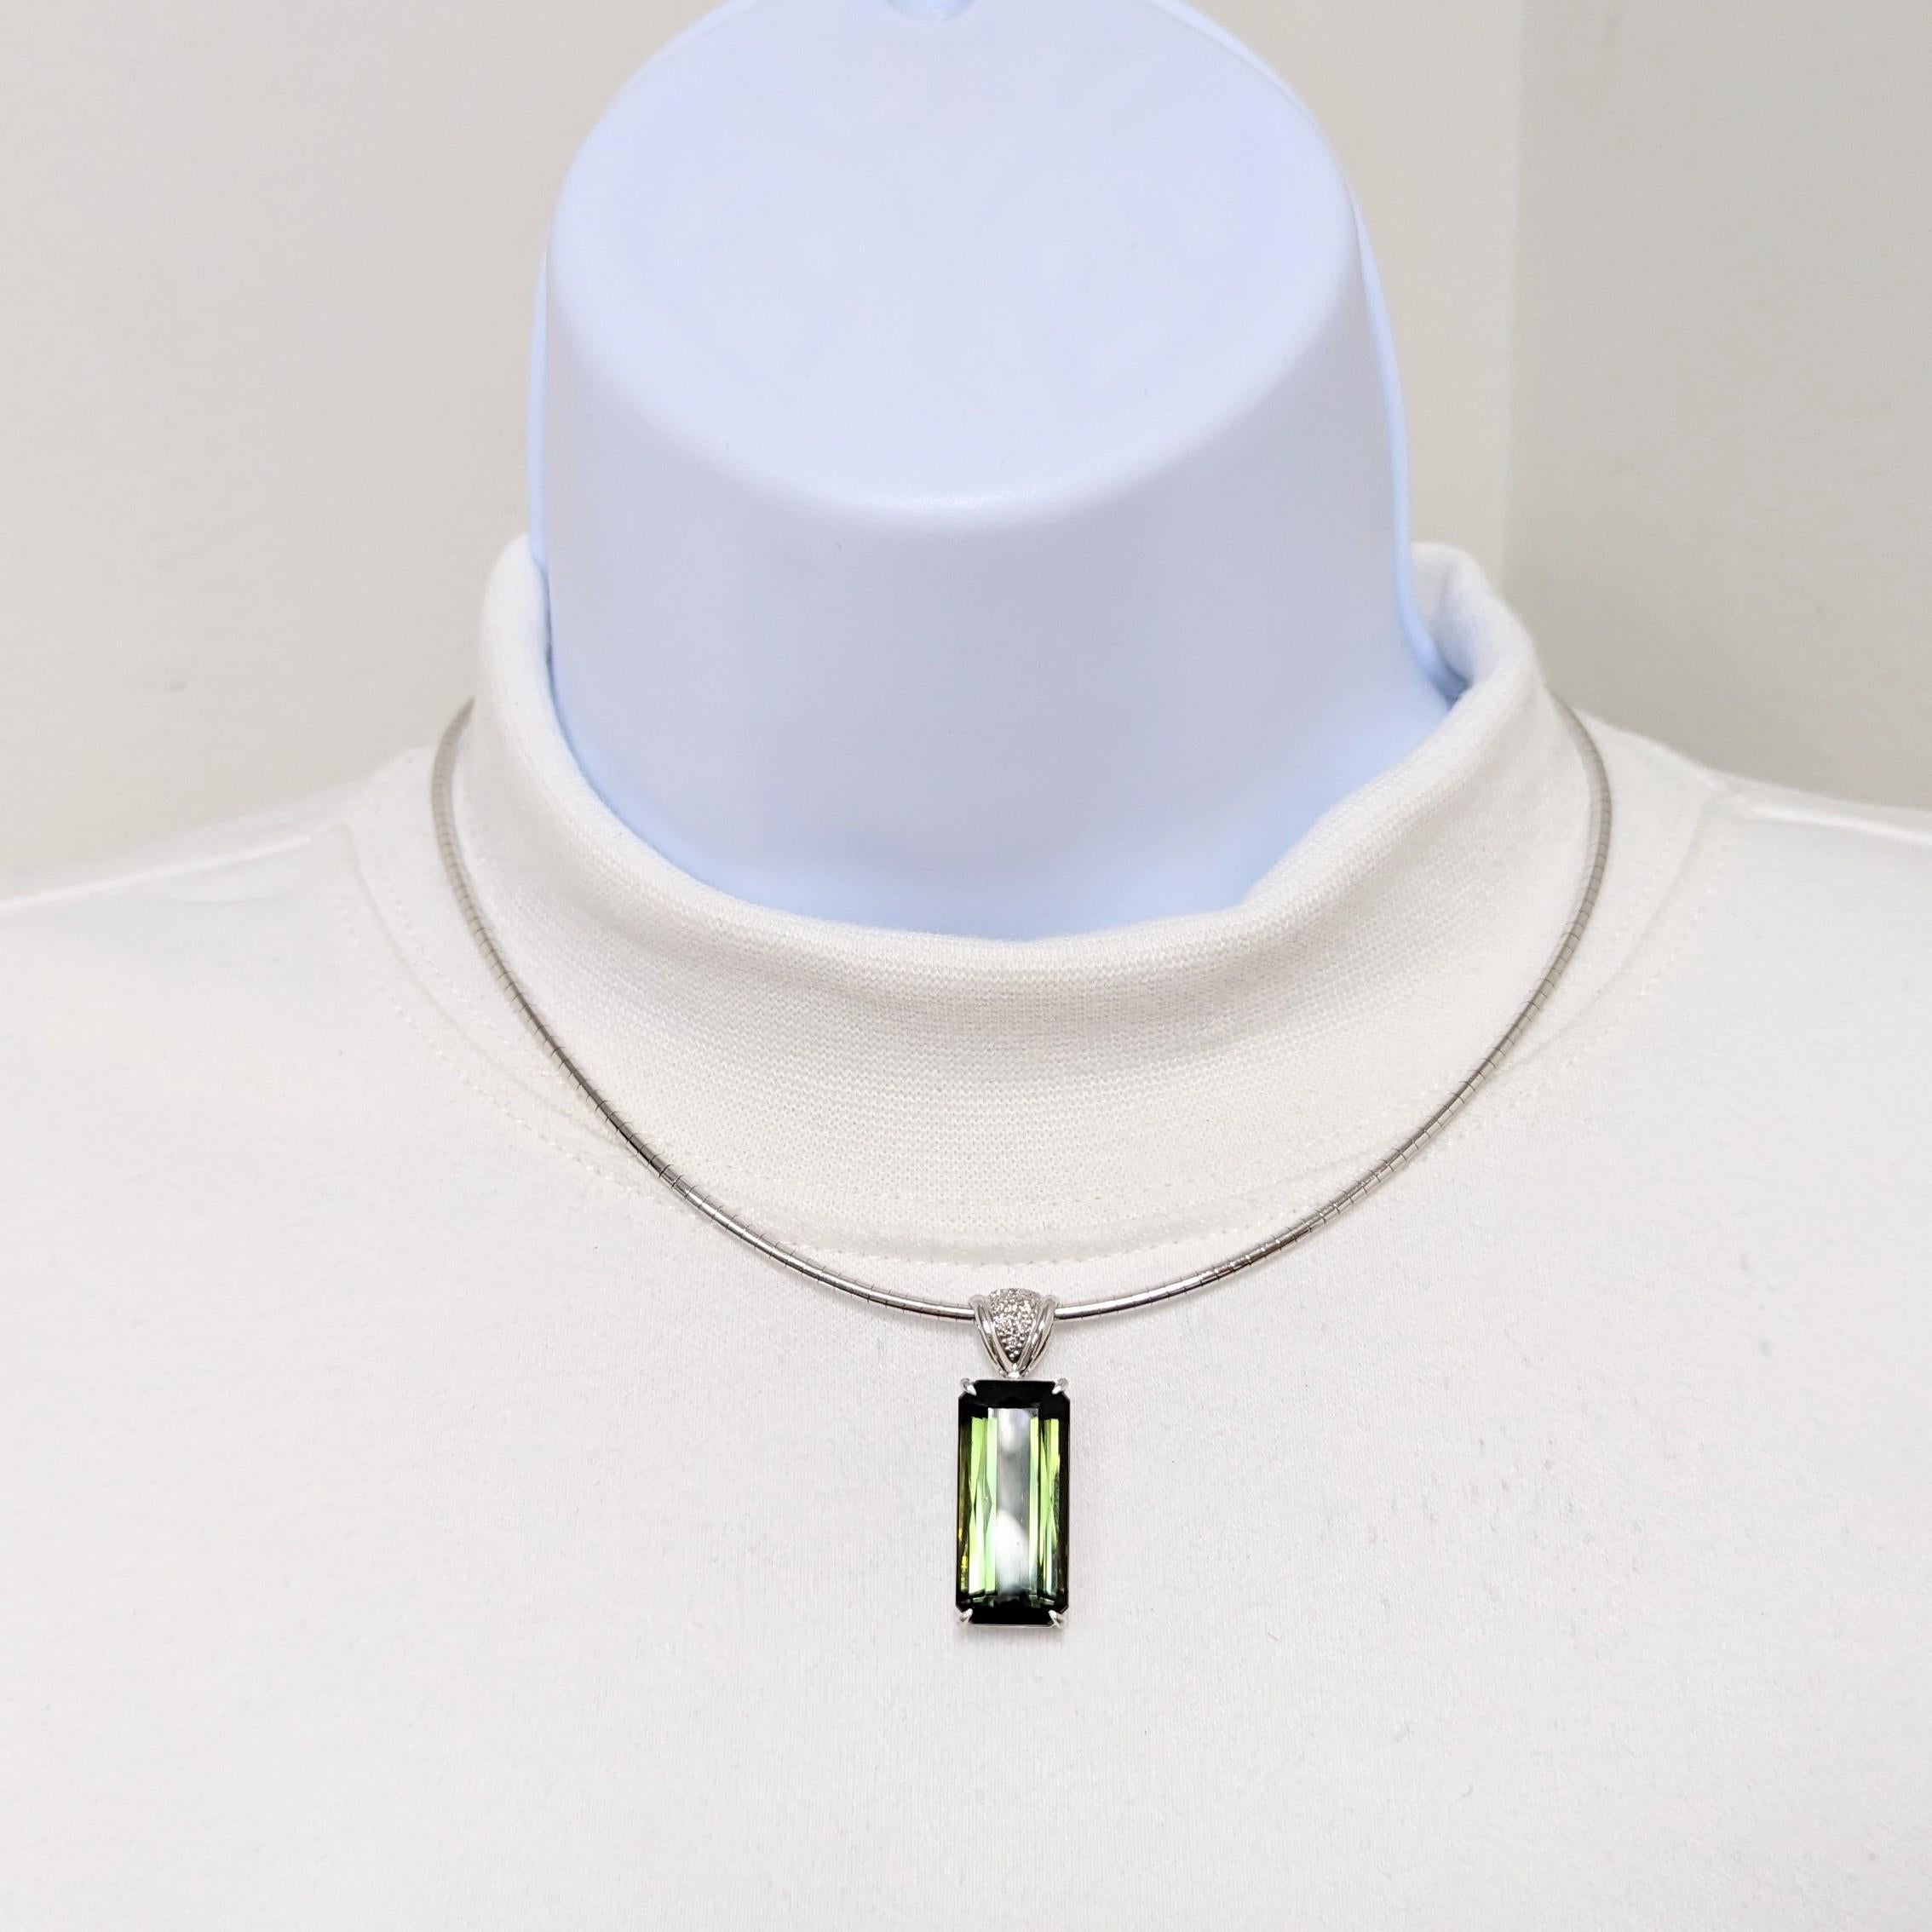 Beautiful 24.38 ct. green tourmaline emerald cut with 0.06 ct. good quality white diamond rounds.  Handmade in 18k white gold with an omega chain.